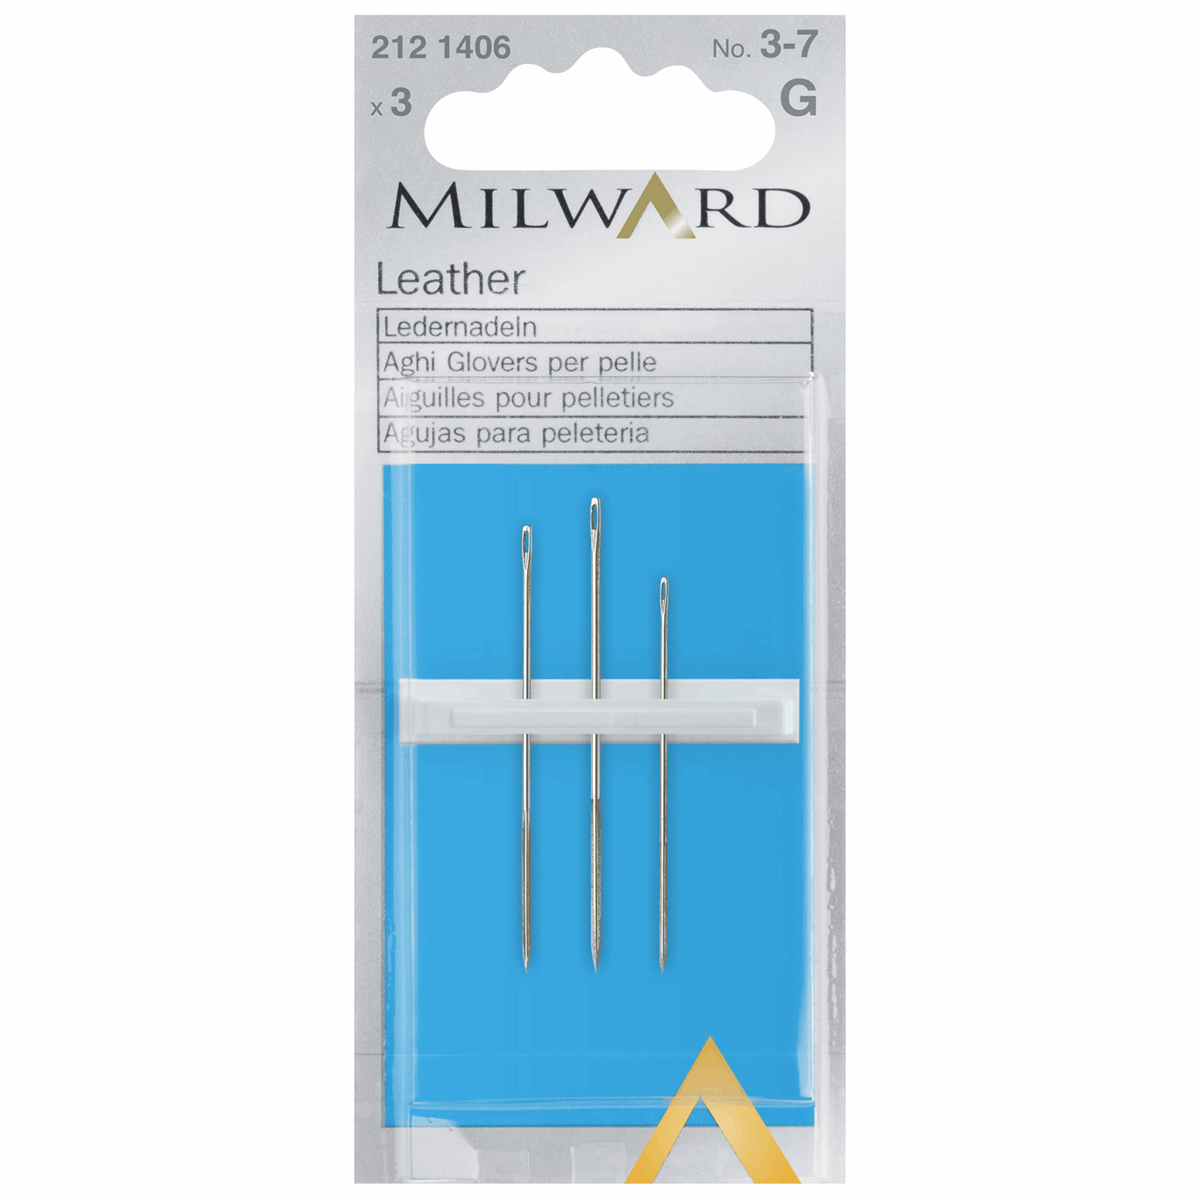  Leather No.3-7:Hand Sewing Needles: 3 Pieces by Milward 